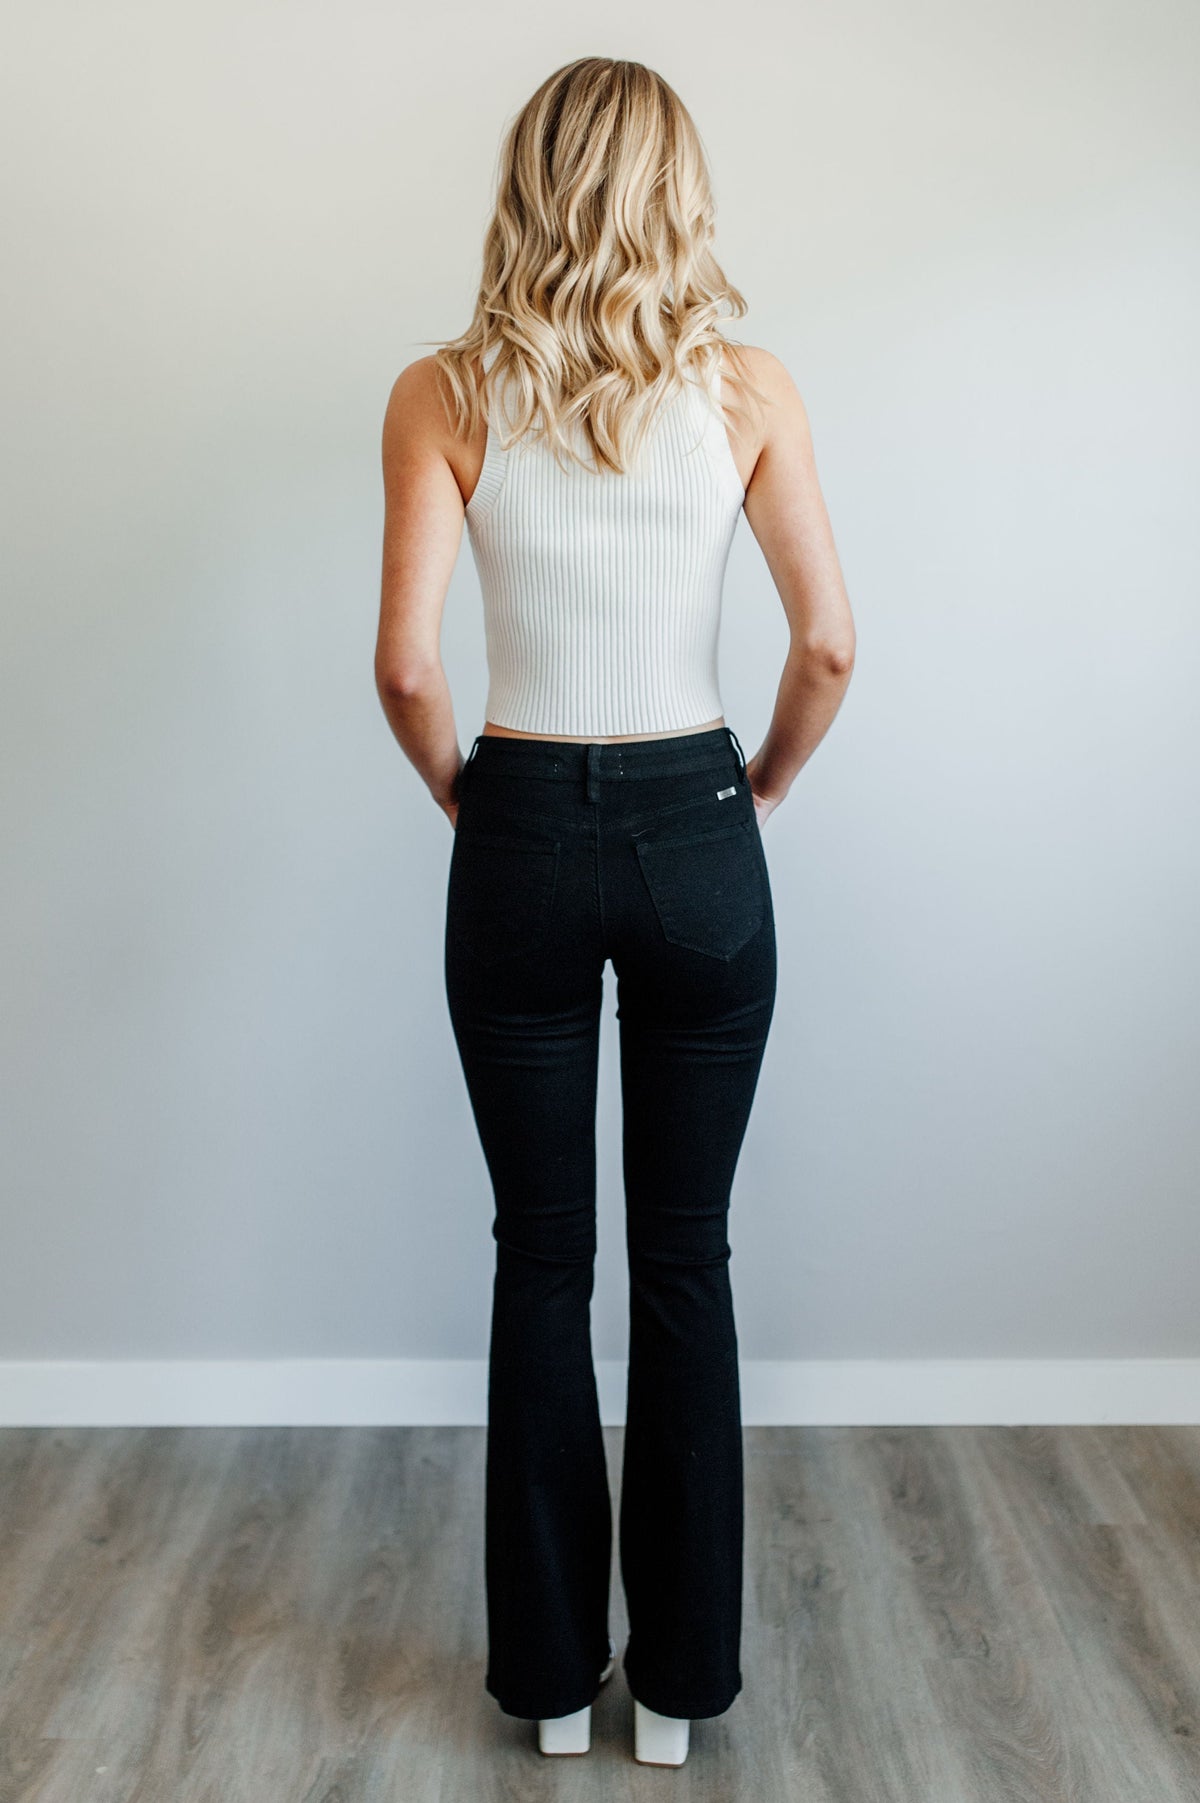 Pictured is a black pair of denim with a mid-rise fit with a slim body and flare at the bottom.